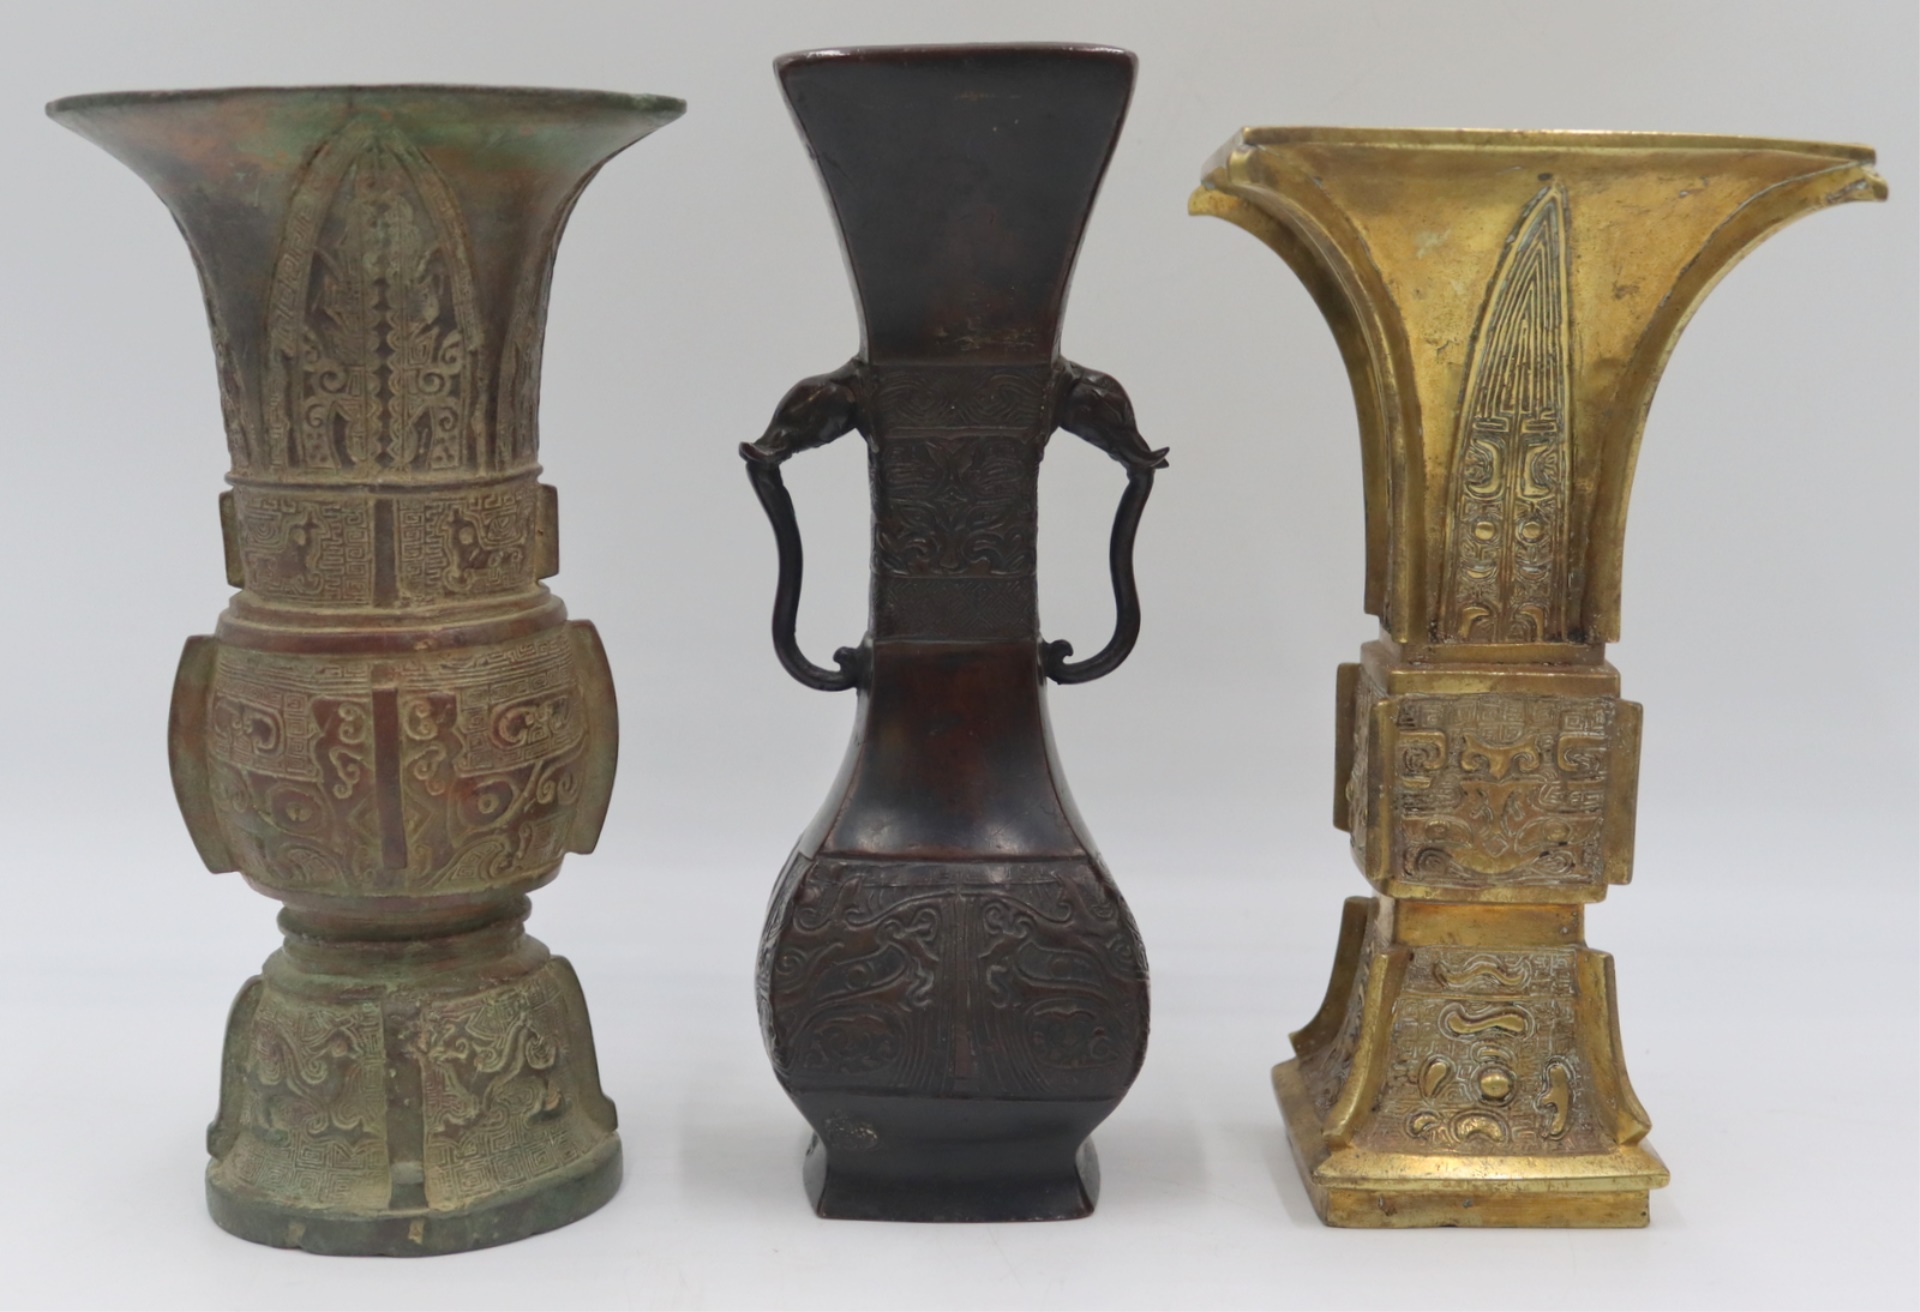  3 ARCHAISTIC ASIAN VESSELS Includes 3bc6a6